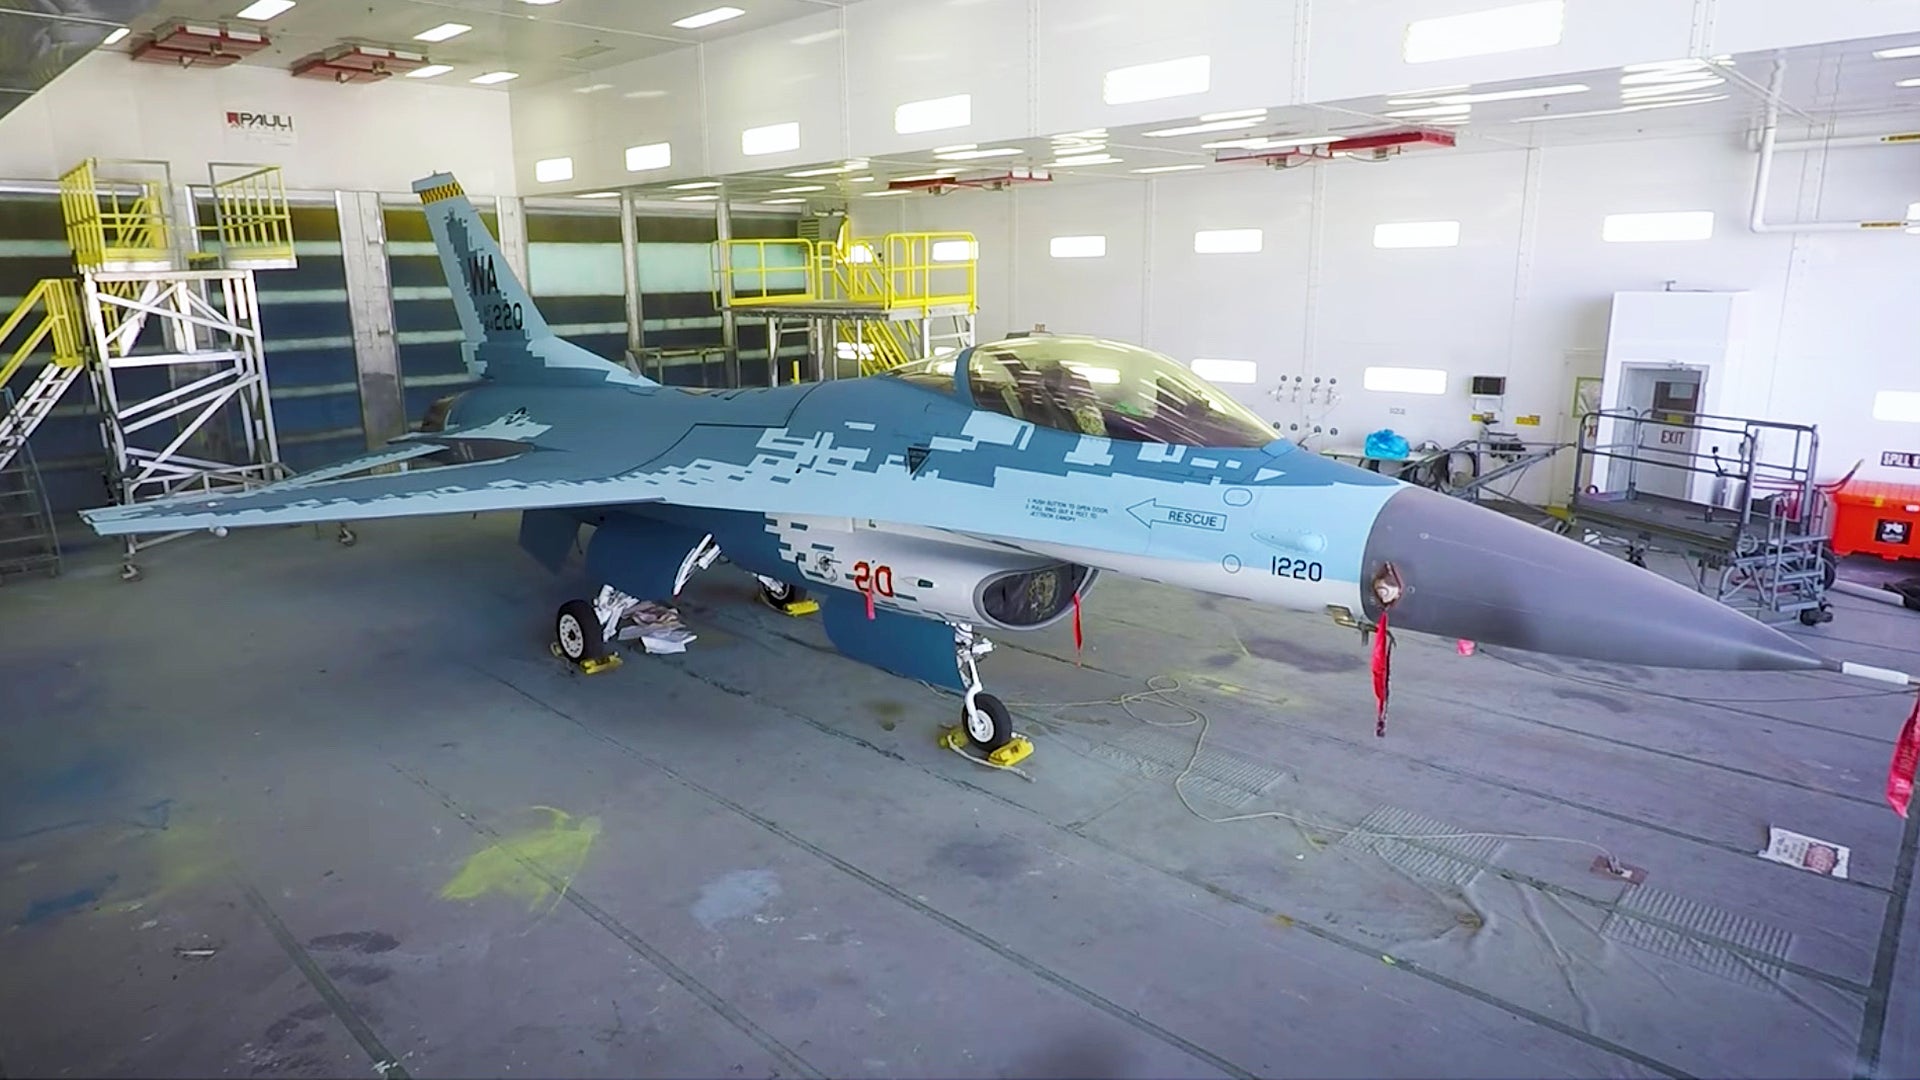 Air Force F-16 Aggressor Jet Emerges In Highly Anticipated “Ghost” Paint Scheme